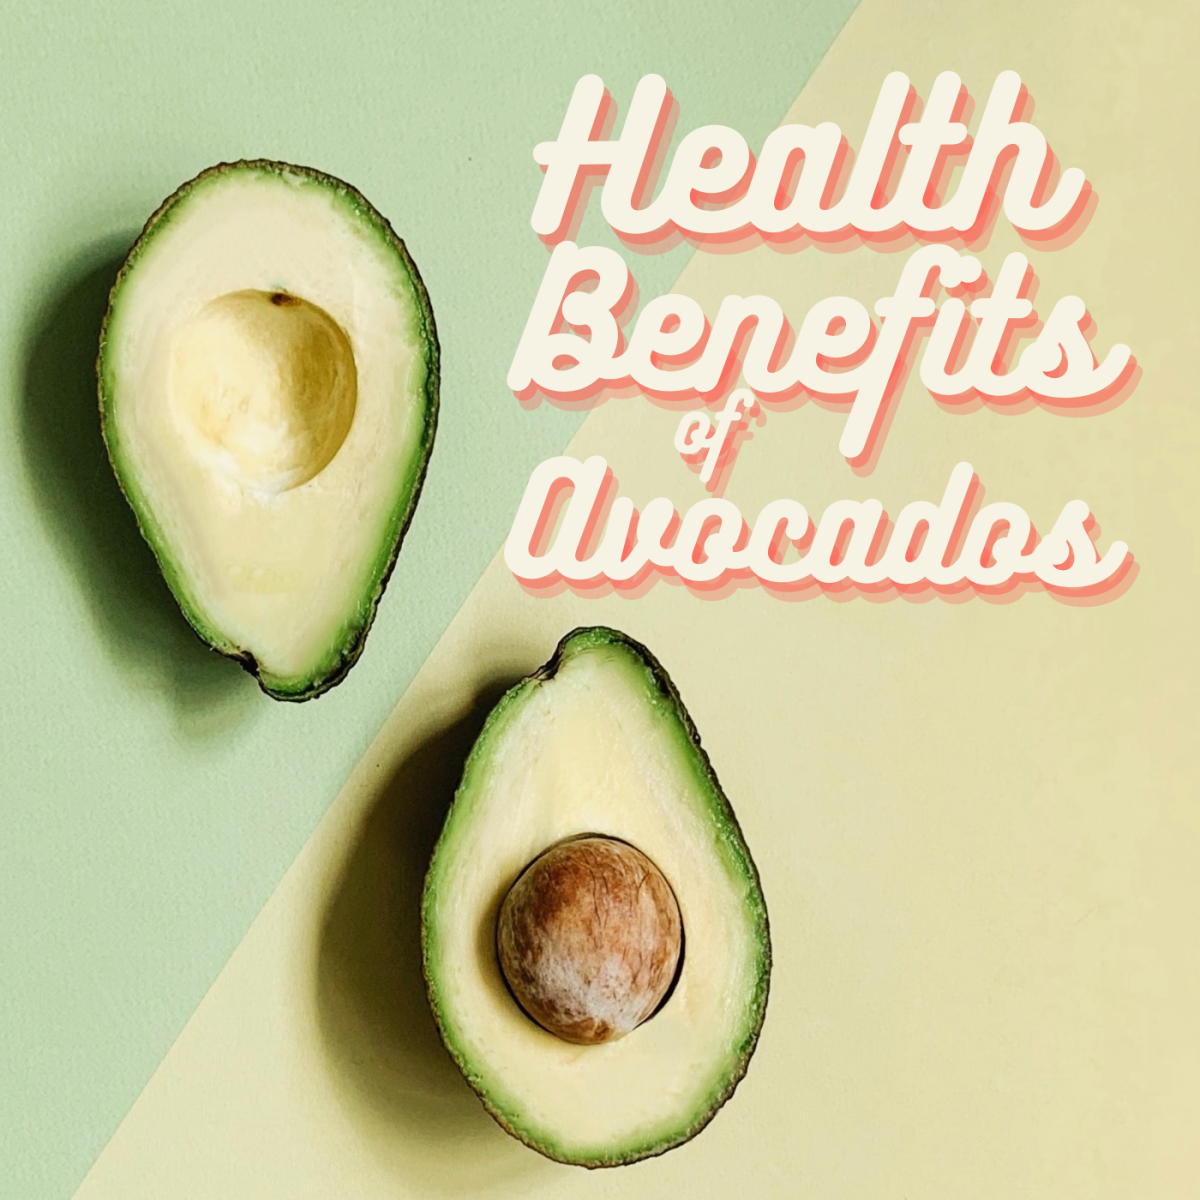 Ten reasons to incorporate avocados into your diet.